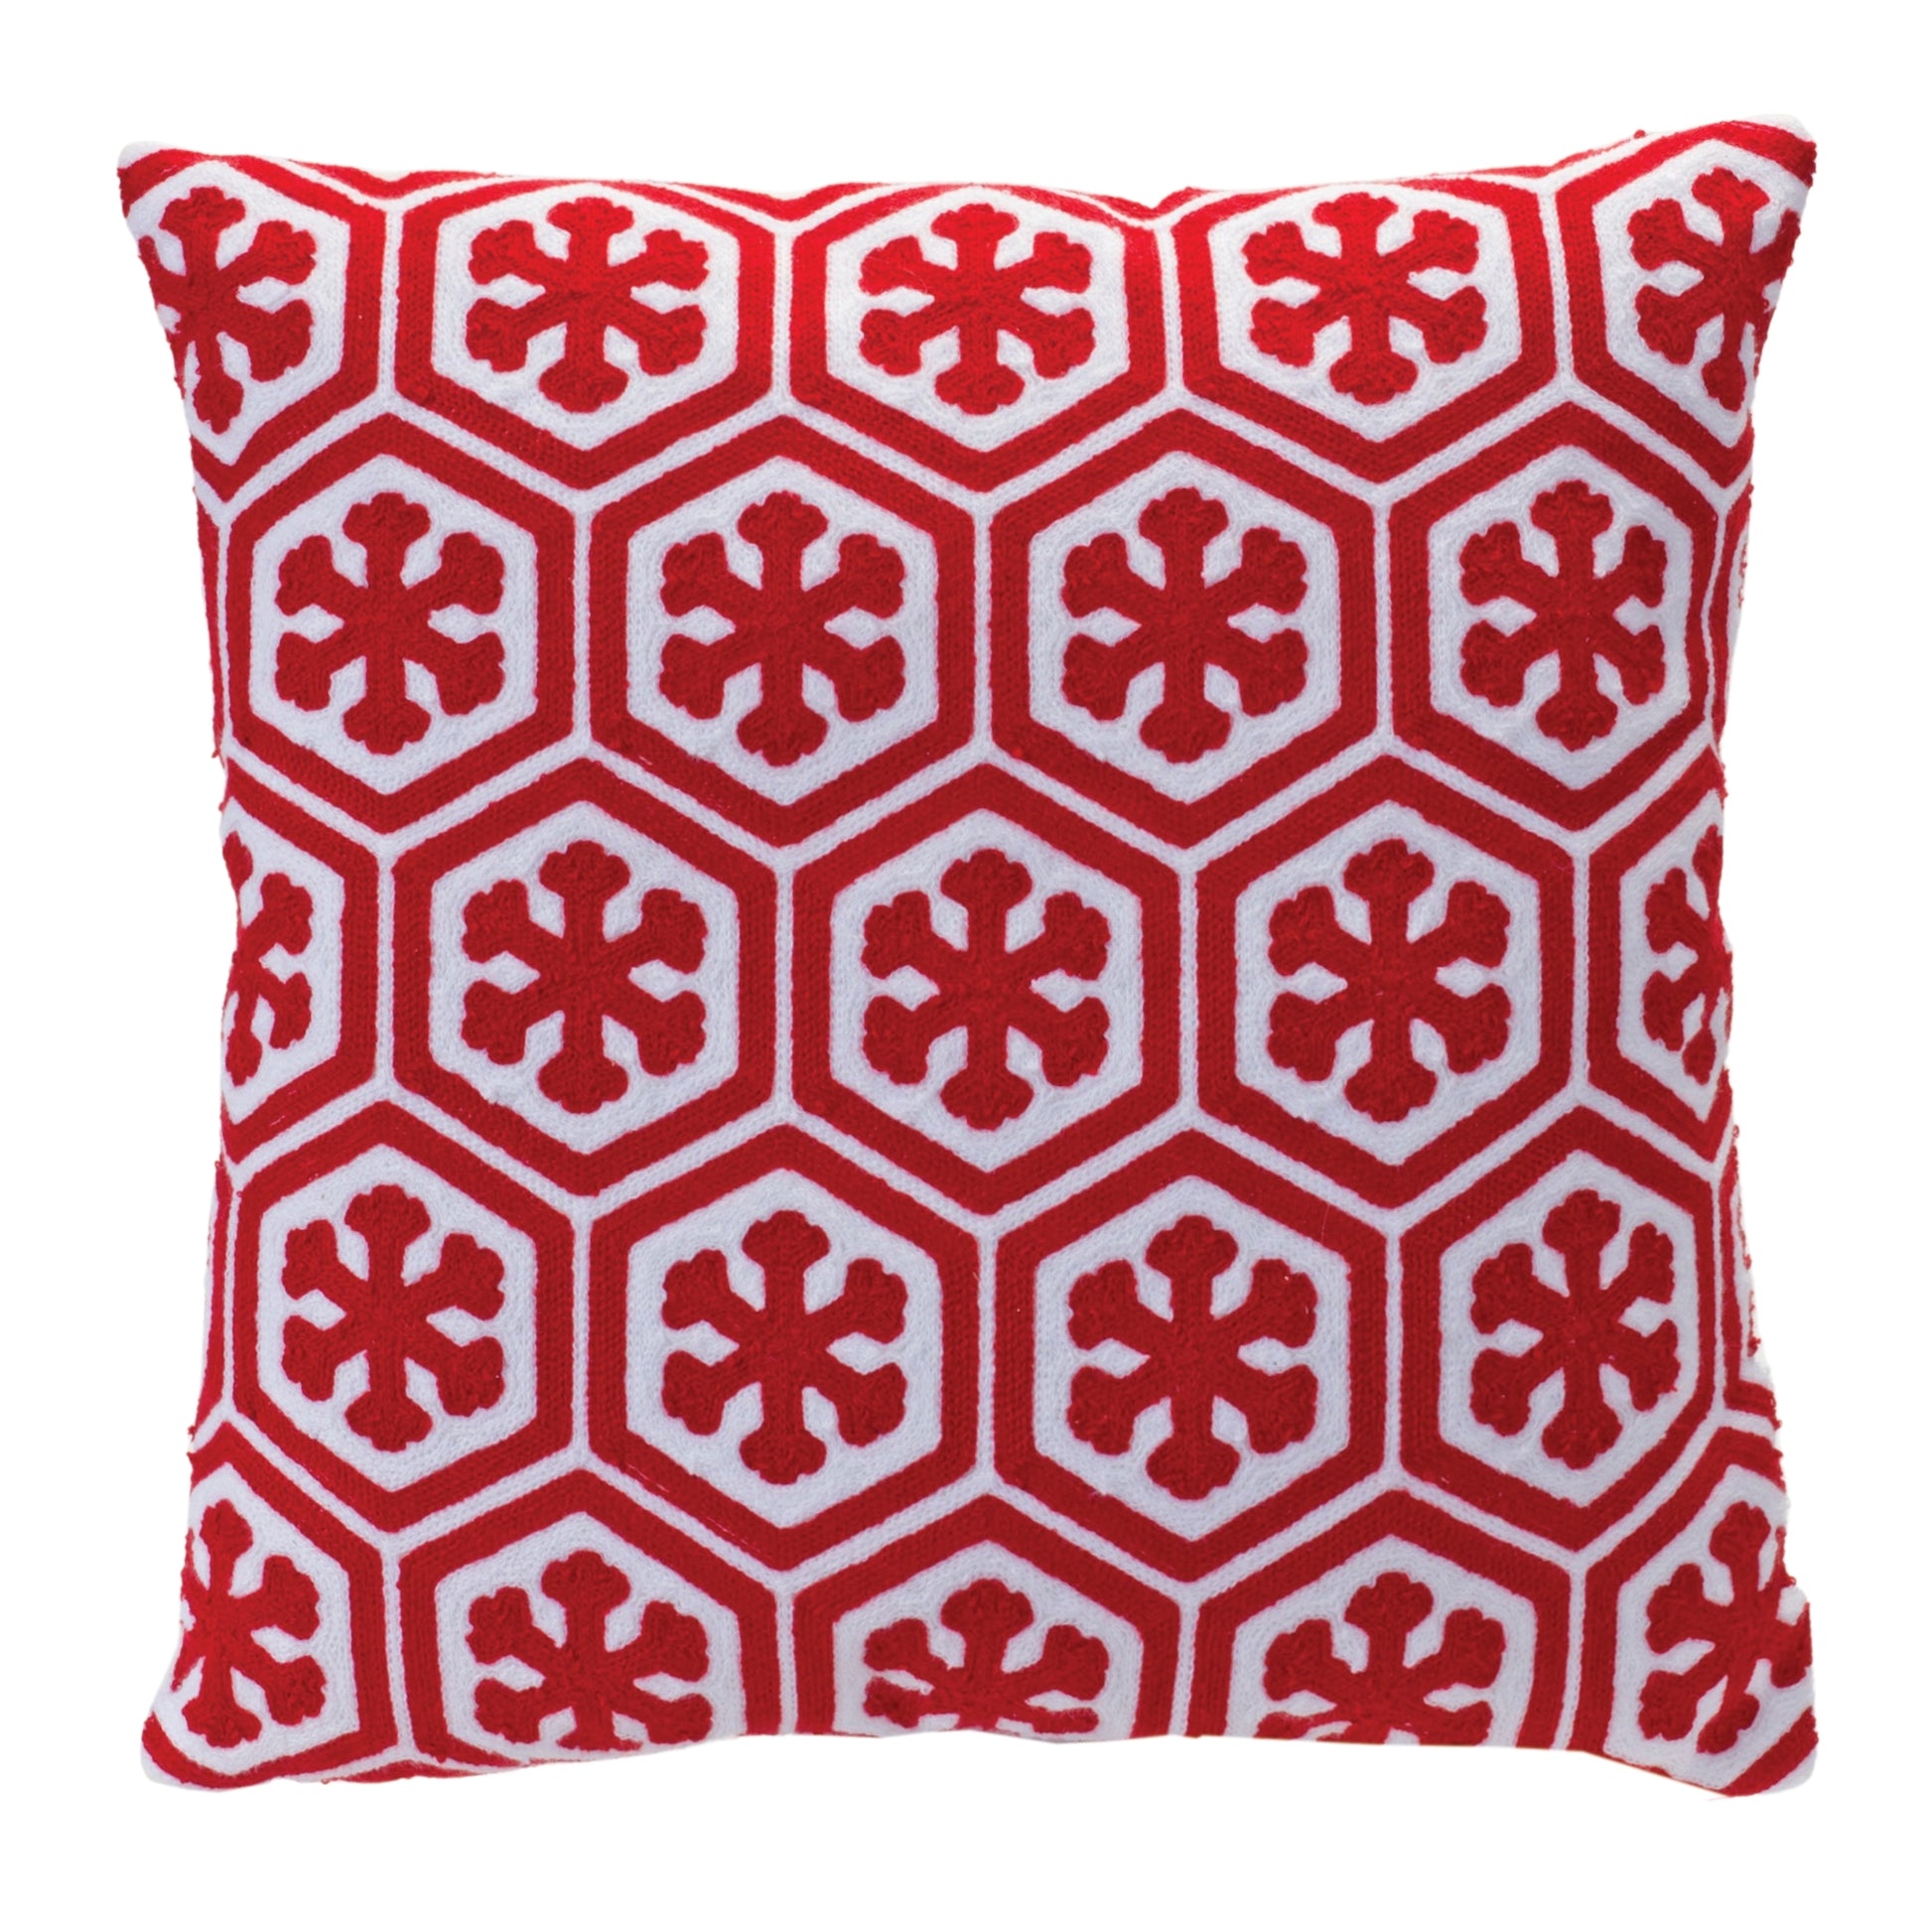 Red + White Pillow with Snowflake Pattern 